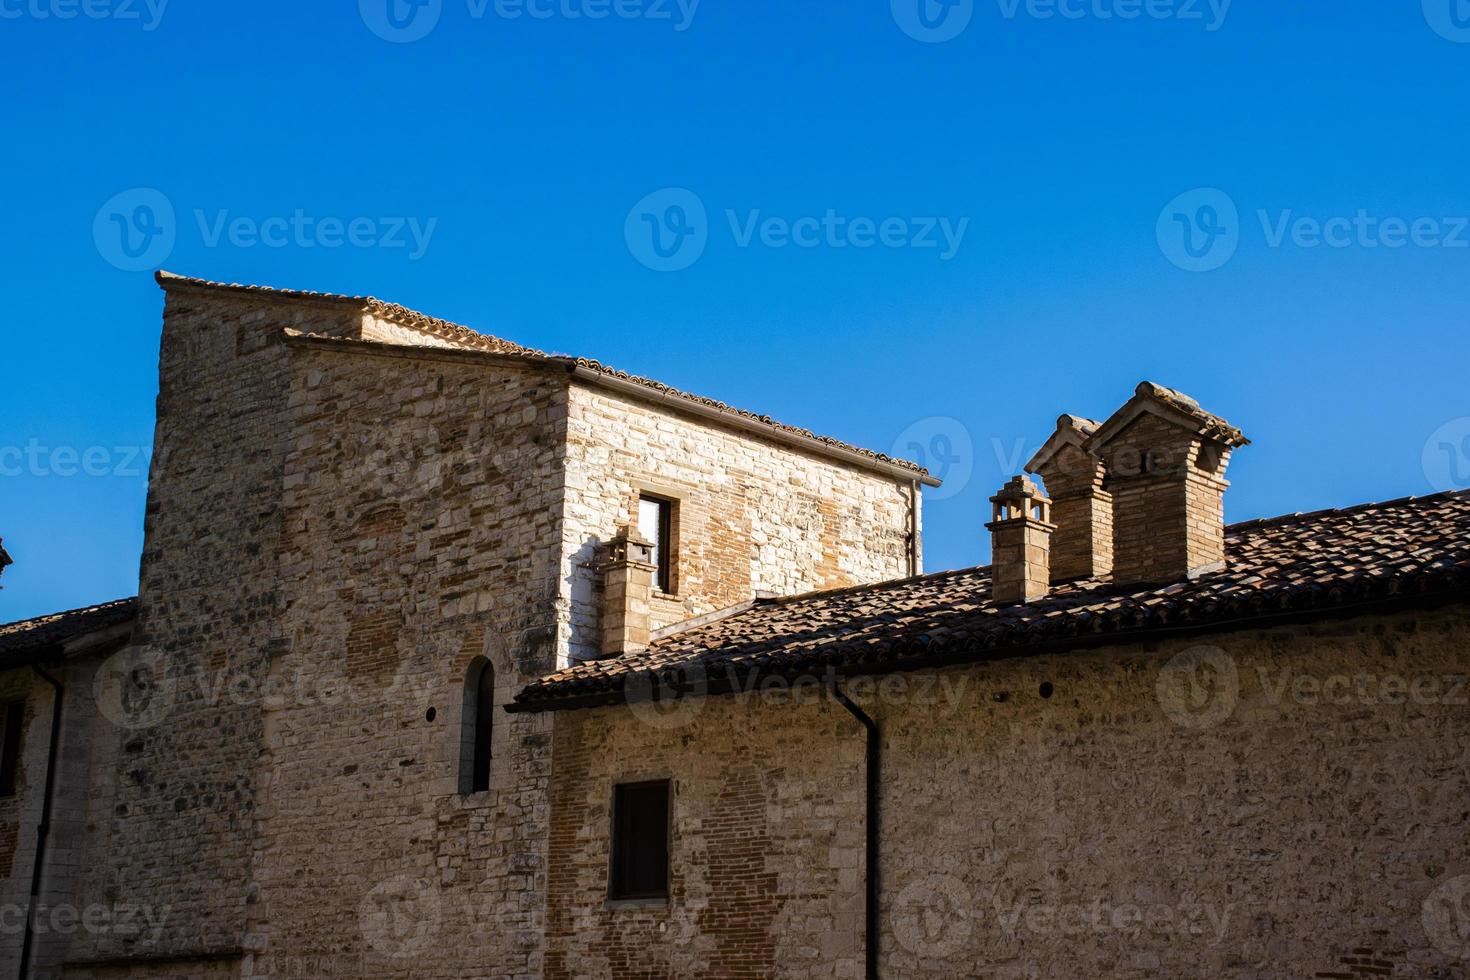 Stone and brick houses with blue skies in Gubbio, Umbria, Italy photo